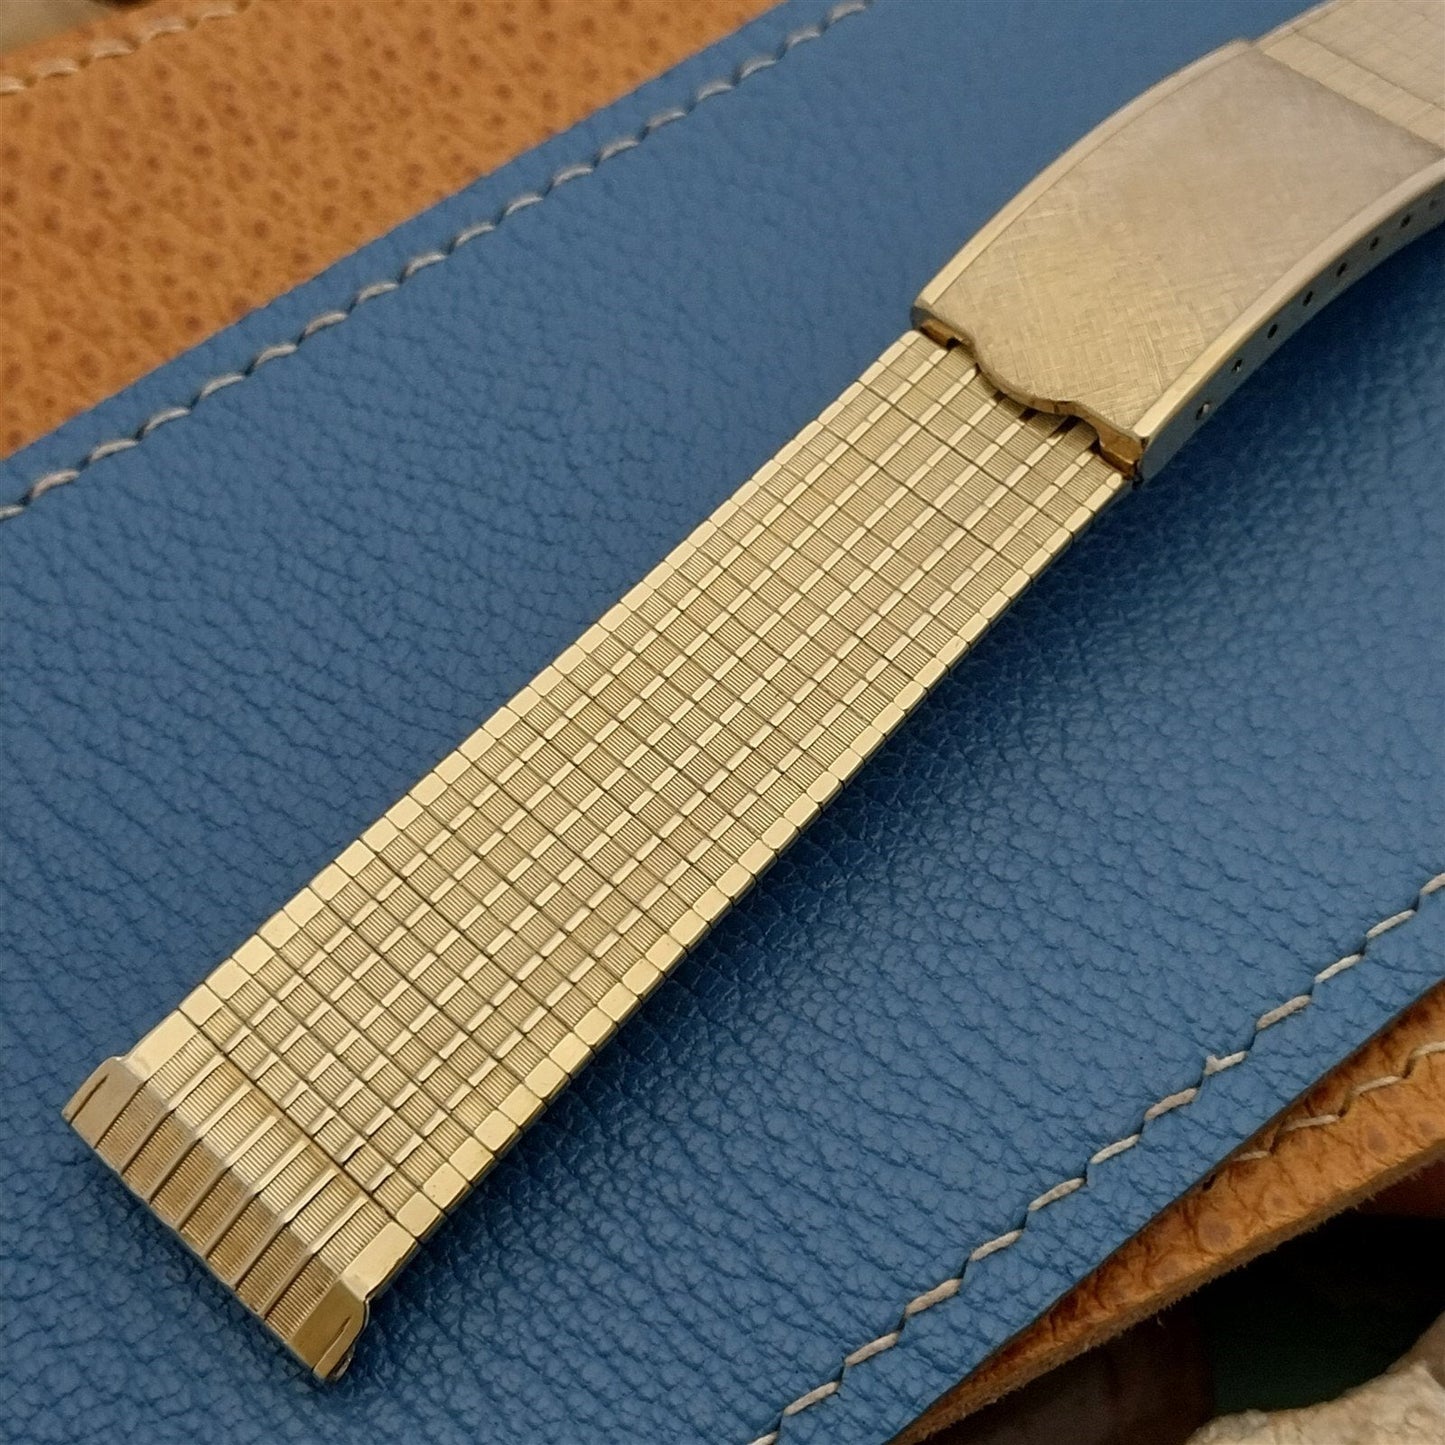 19mm 10k Gold-Filled 1960s Classic Kestenmade USA Vintage Watch Band